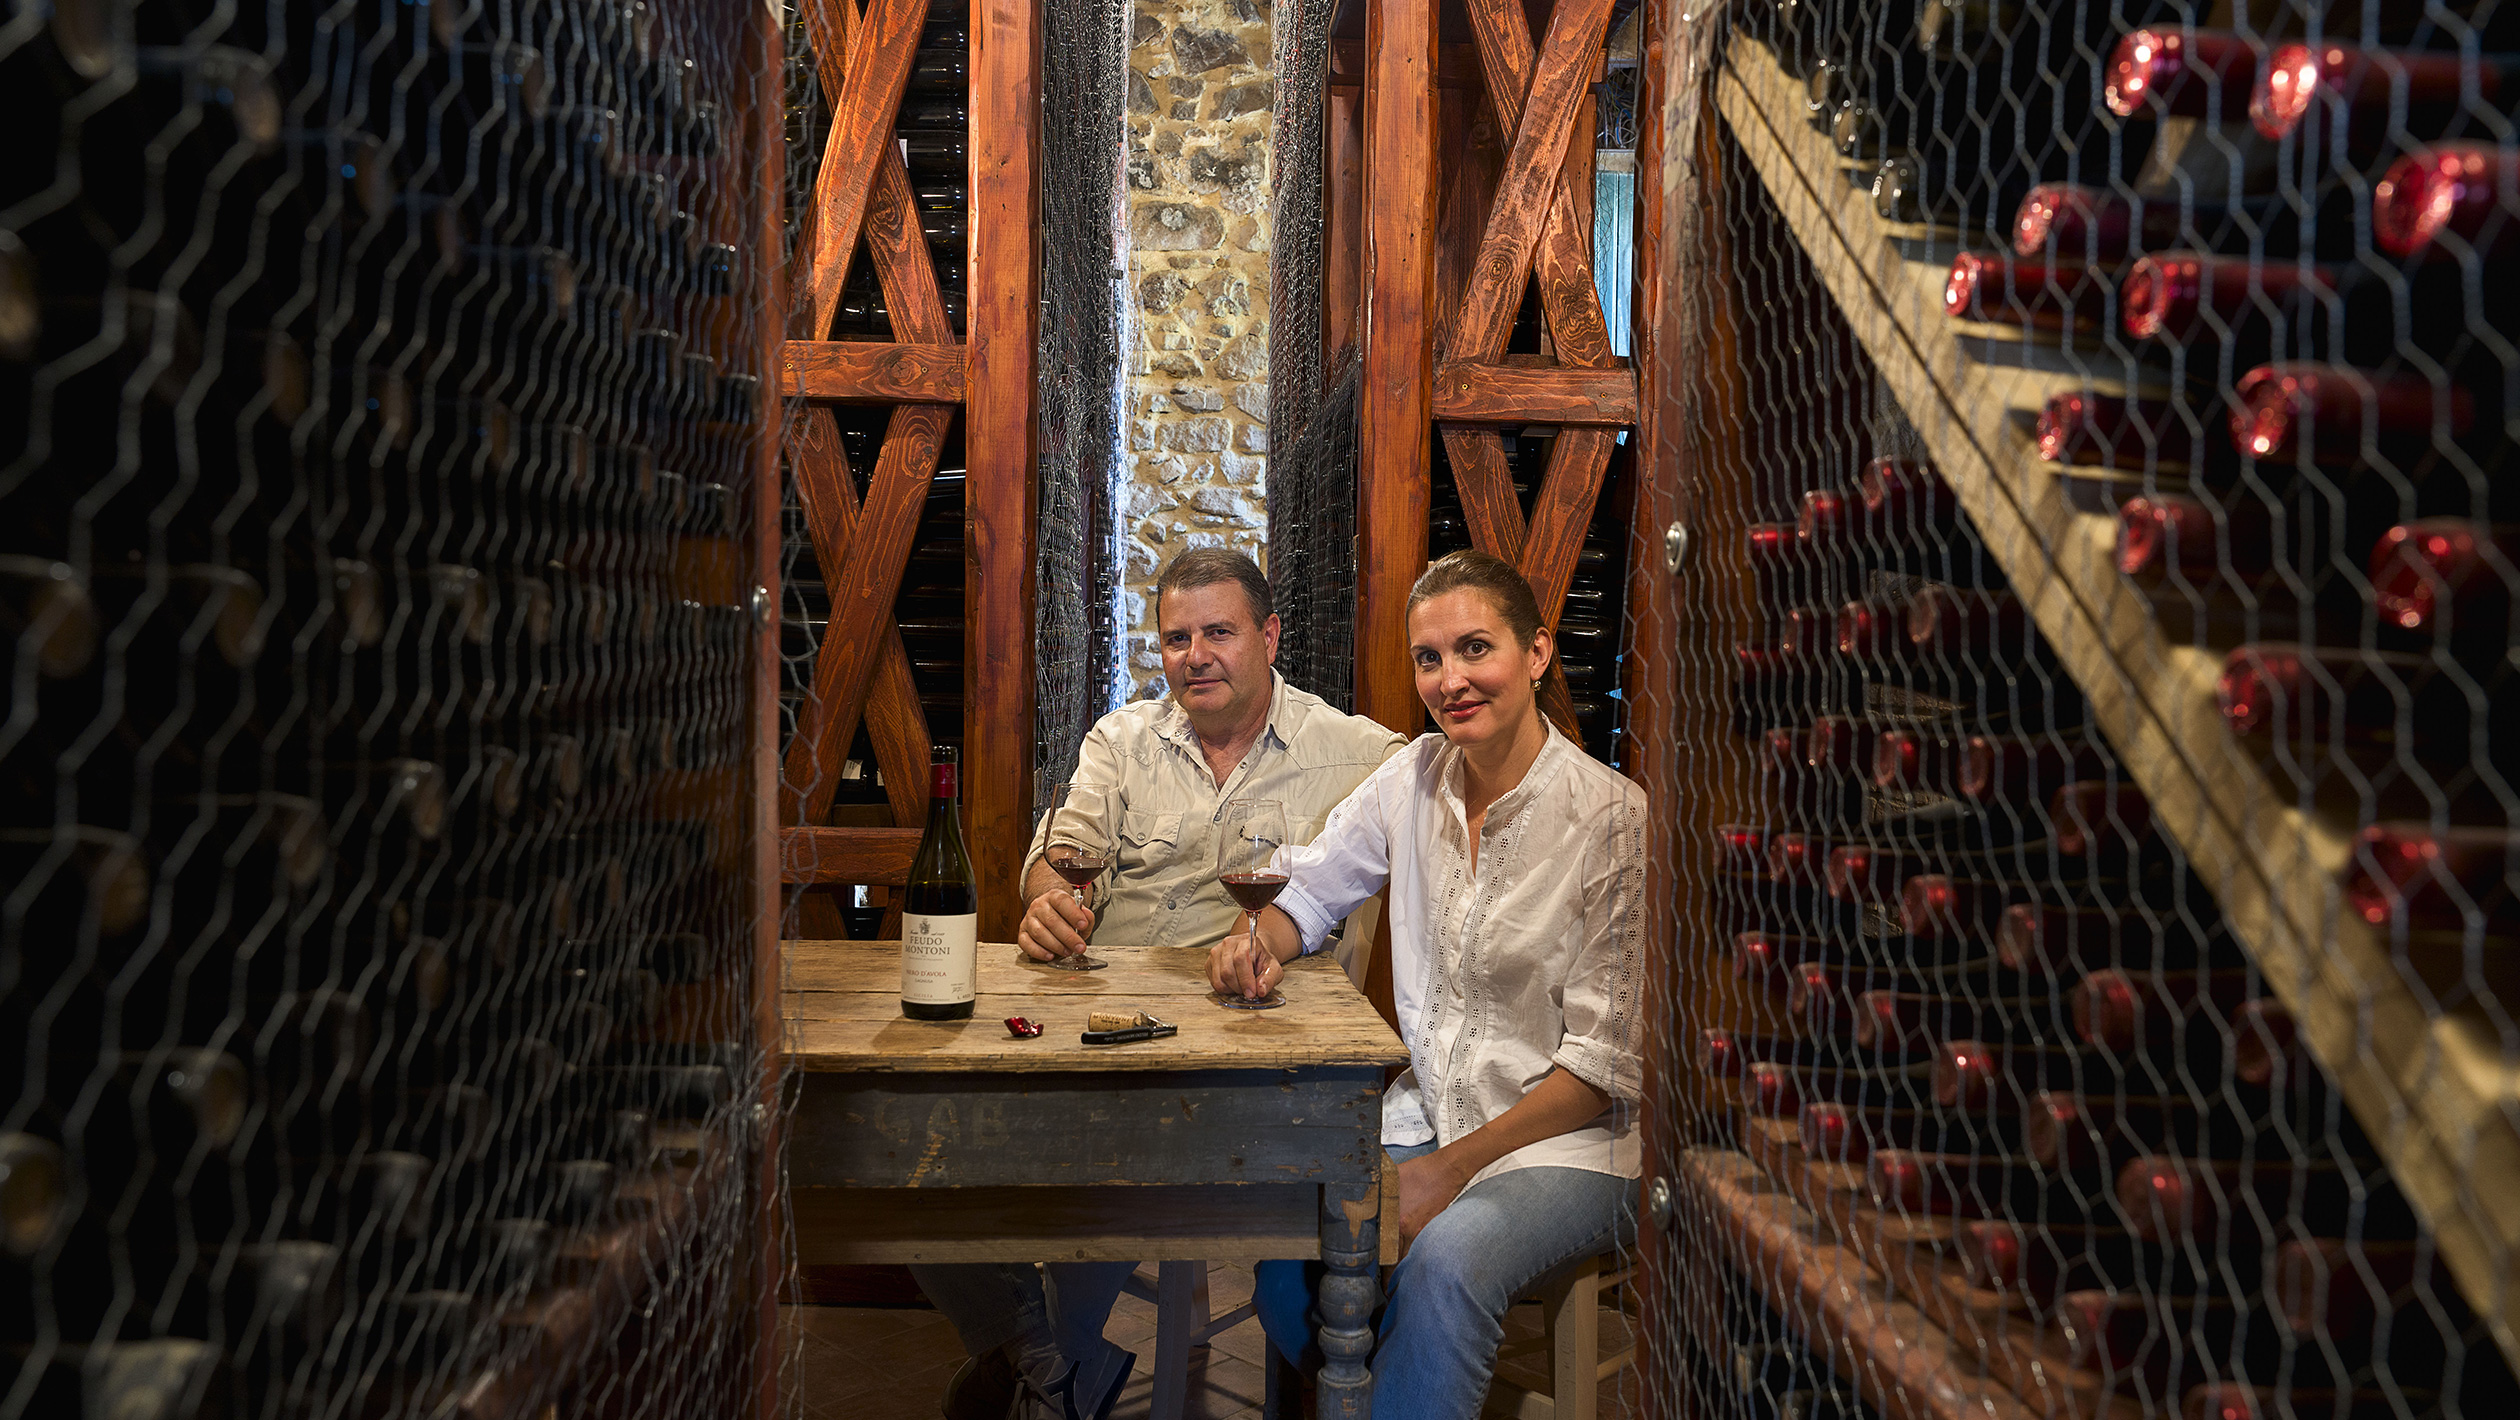 Fabio Sireci and Melissa Muller pose in a wine cellar at a table